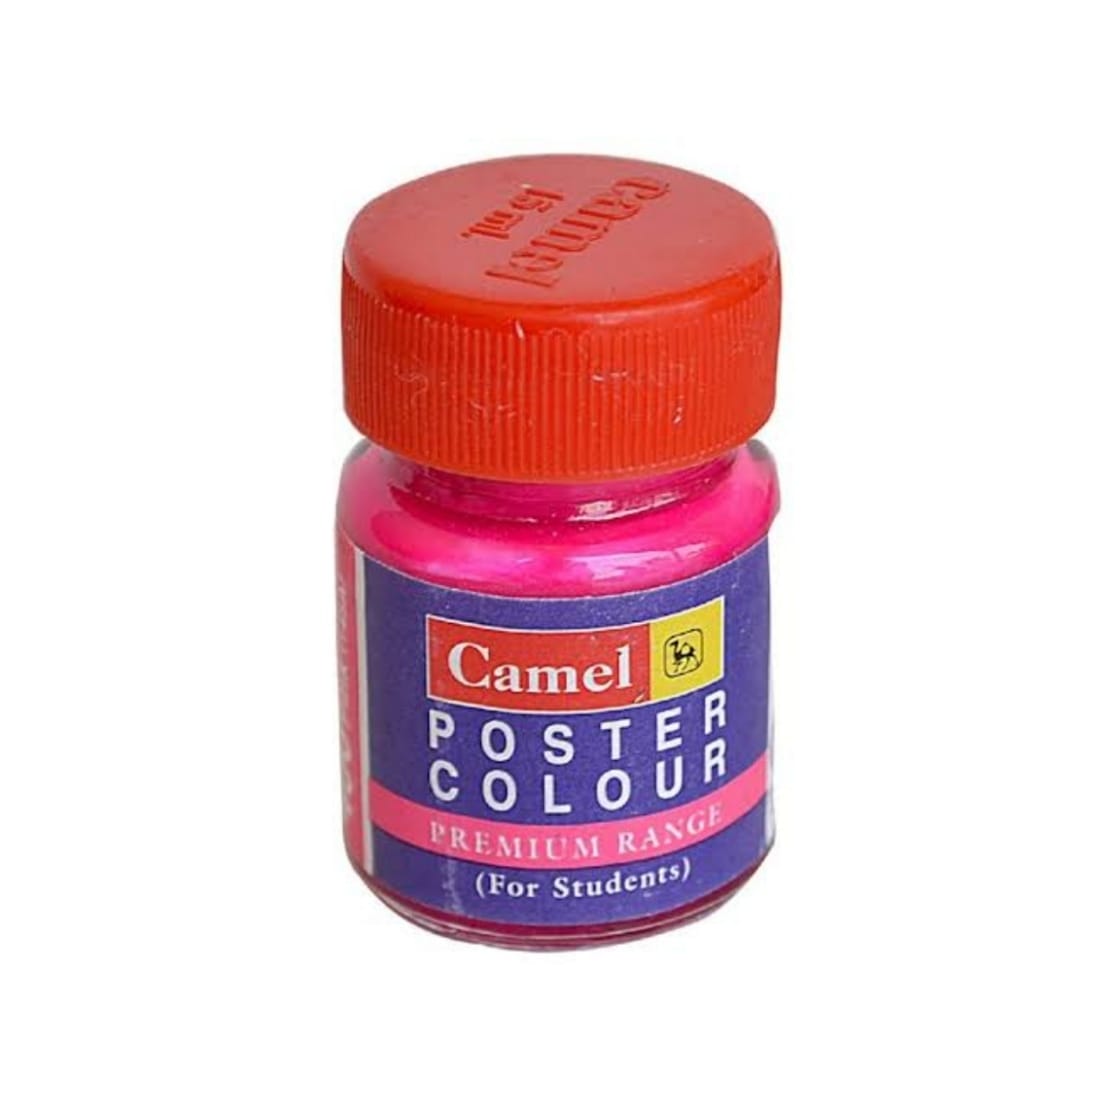 Camel Poster colour Special Pink  (406) 15ml